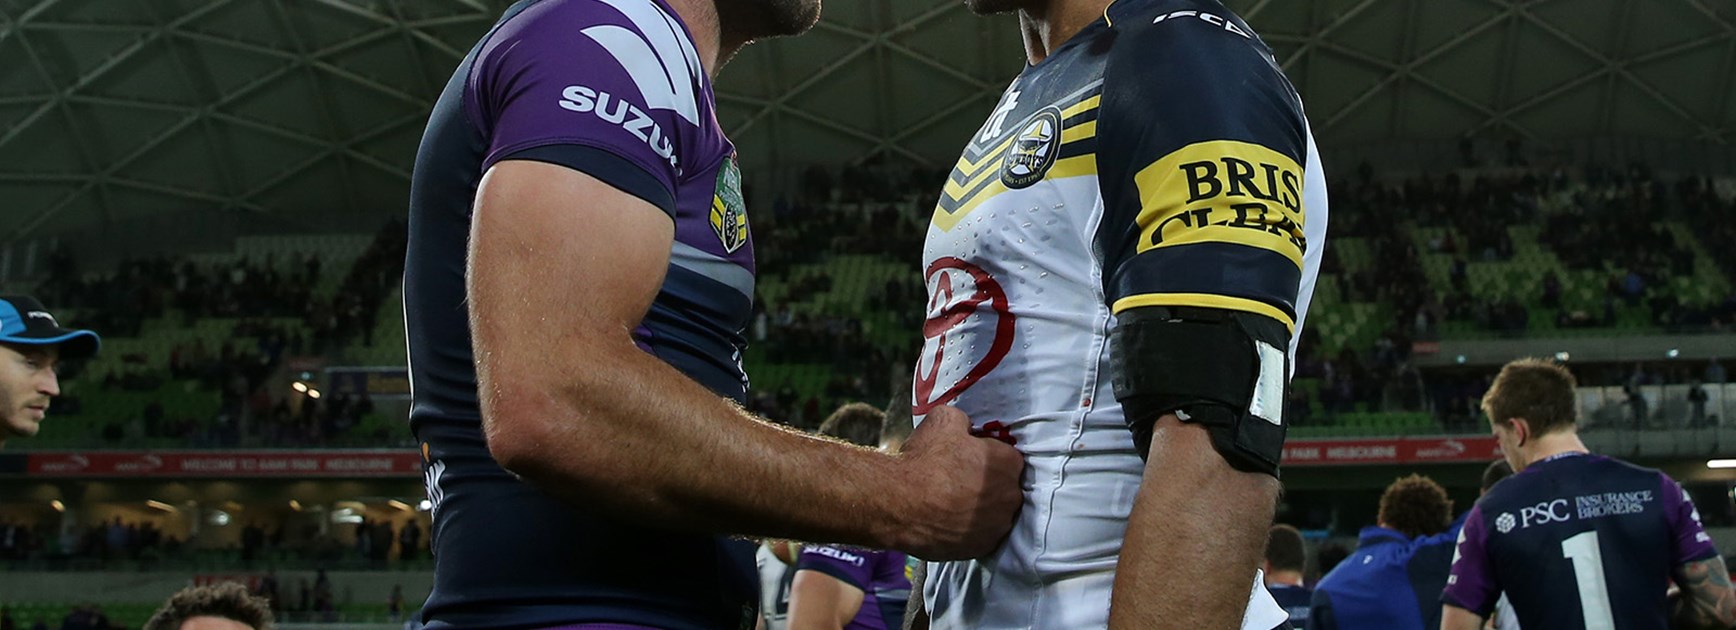 Great mates Cam Smith and Johnathan Thurston share a moment after their Preliminary Final.